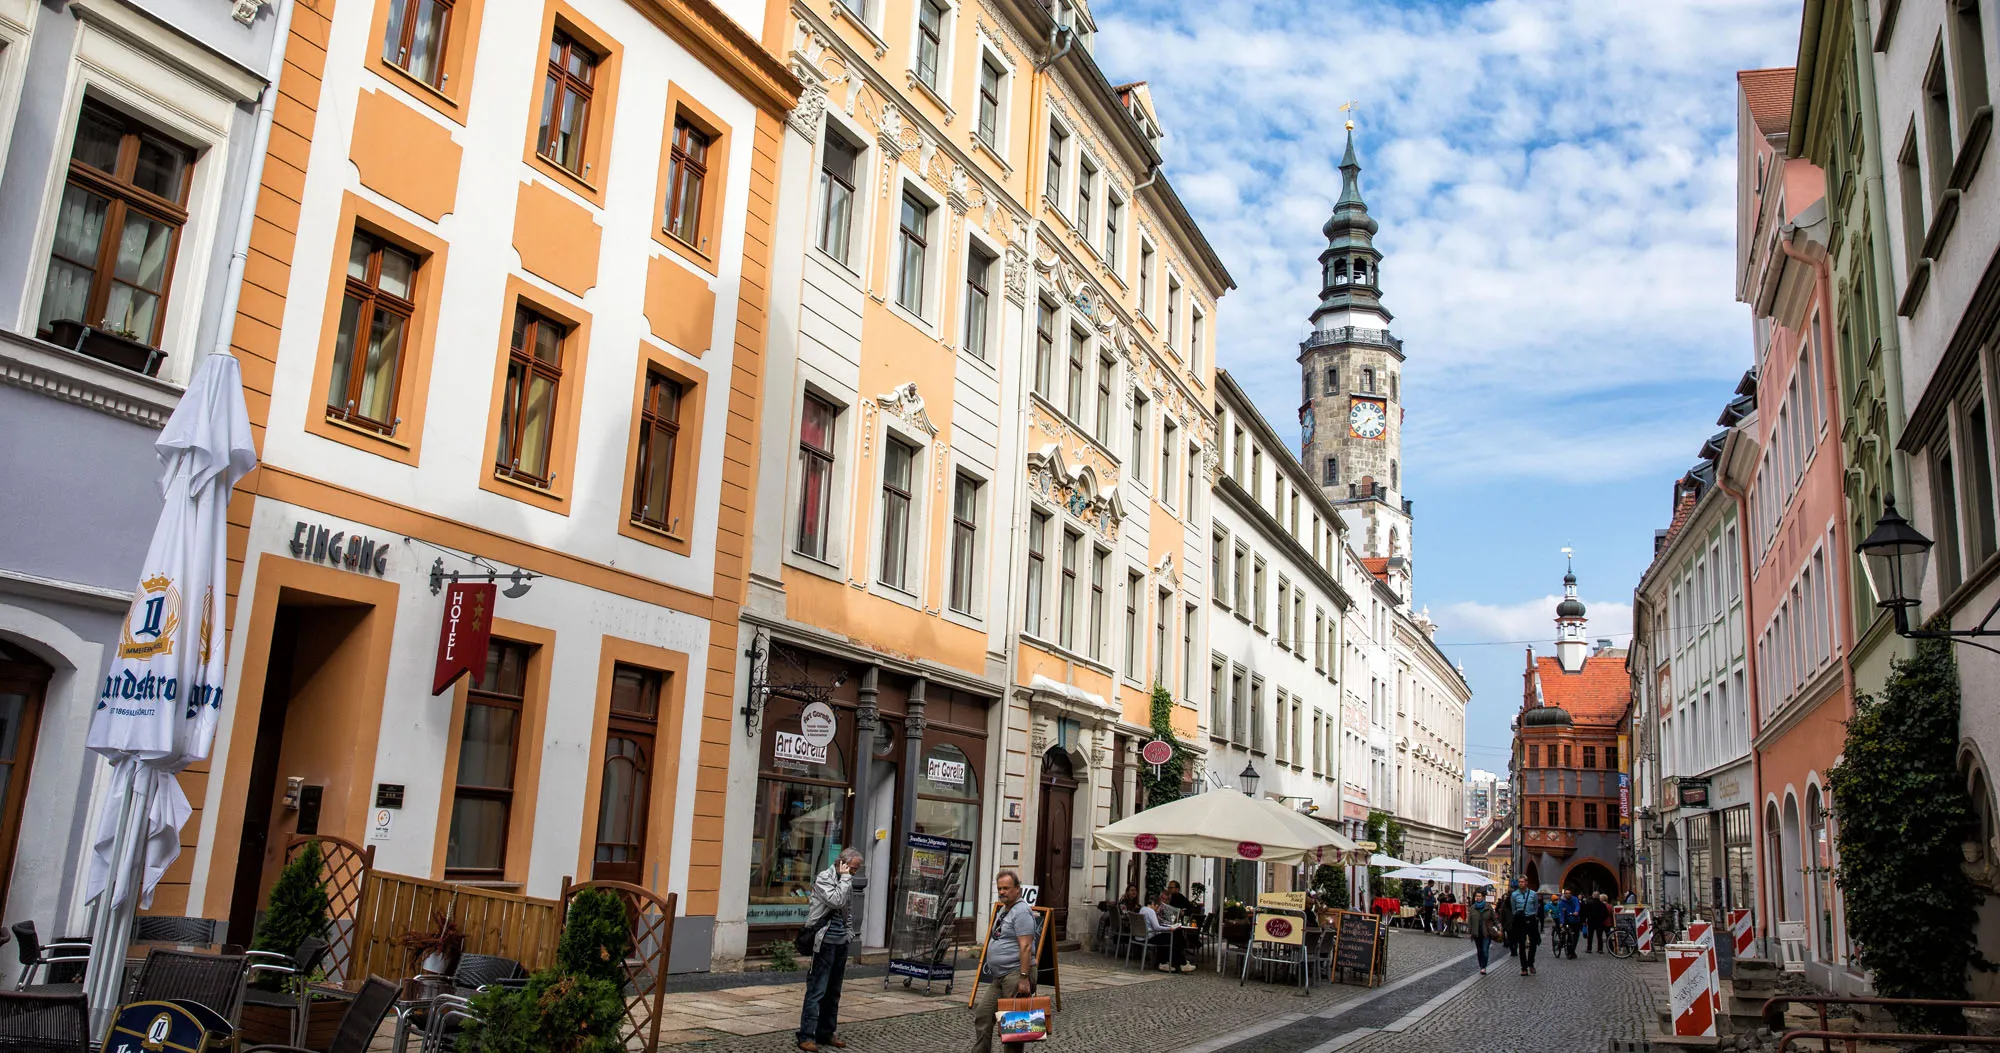 Featured image for “17 Photos That Will Make You Want to Visit Görlitz, Germany”